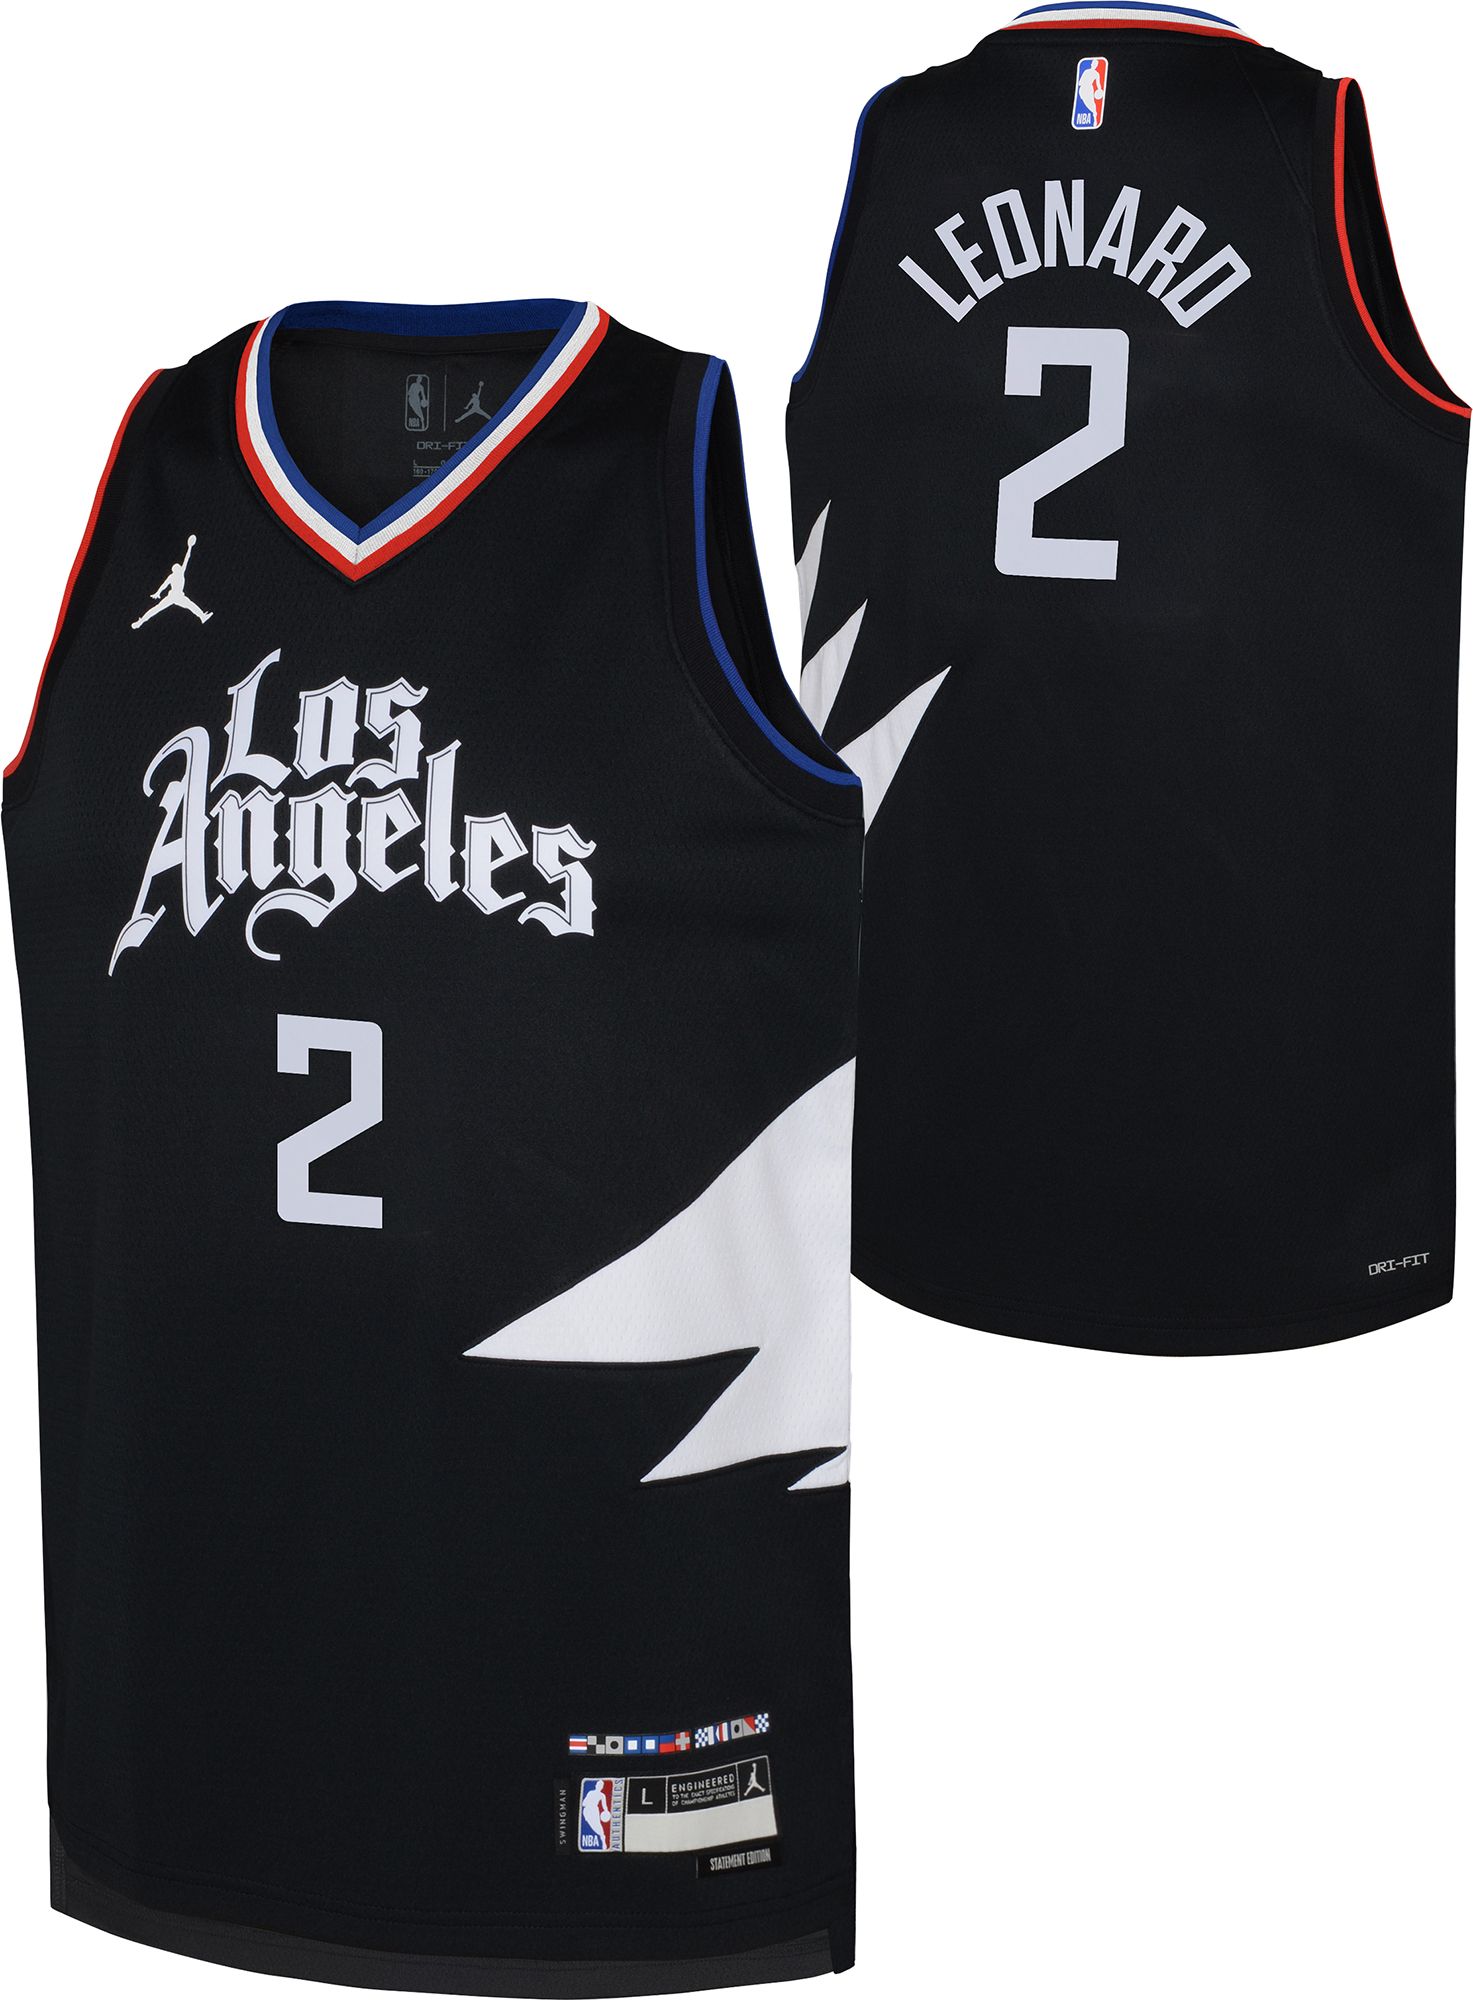 Authentic Men's Paul George Navy Blue Jersey - #13 Basketball Los Angeles  Clippers City Edition